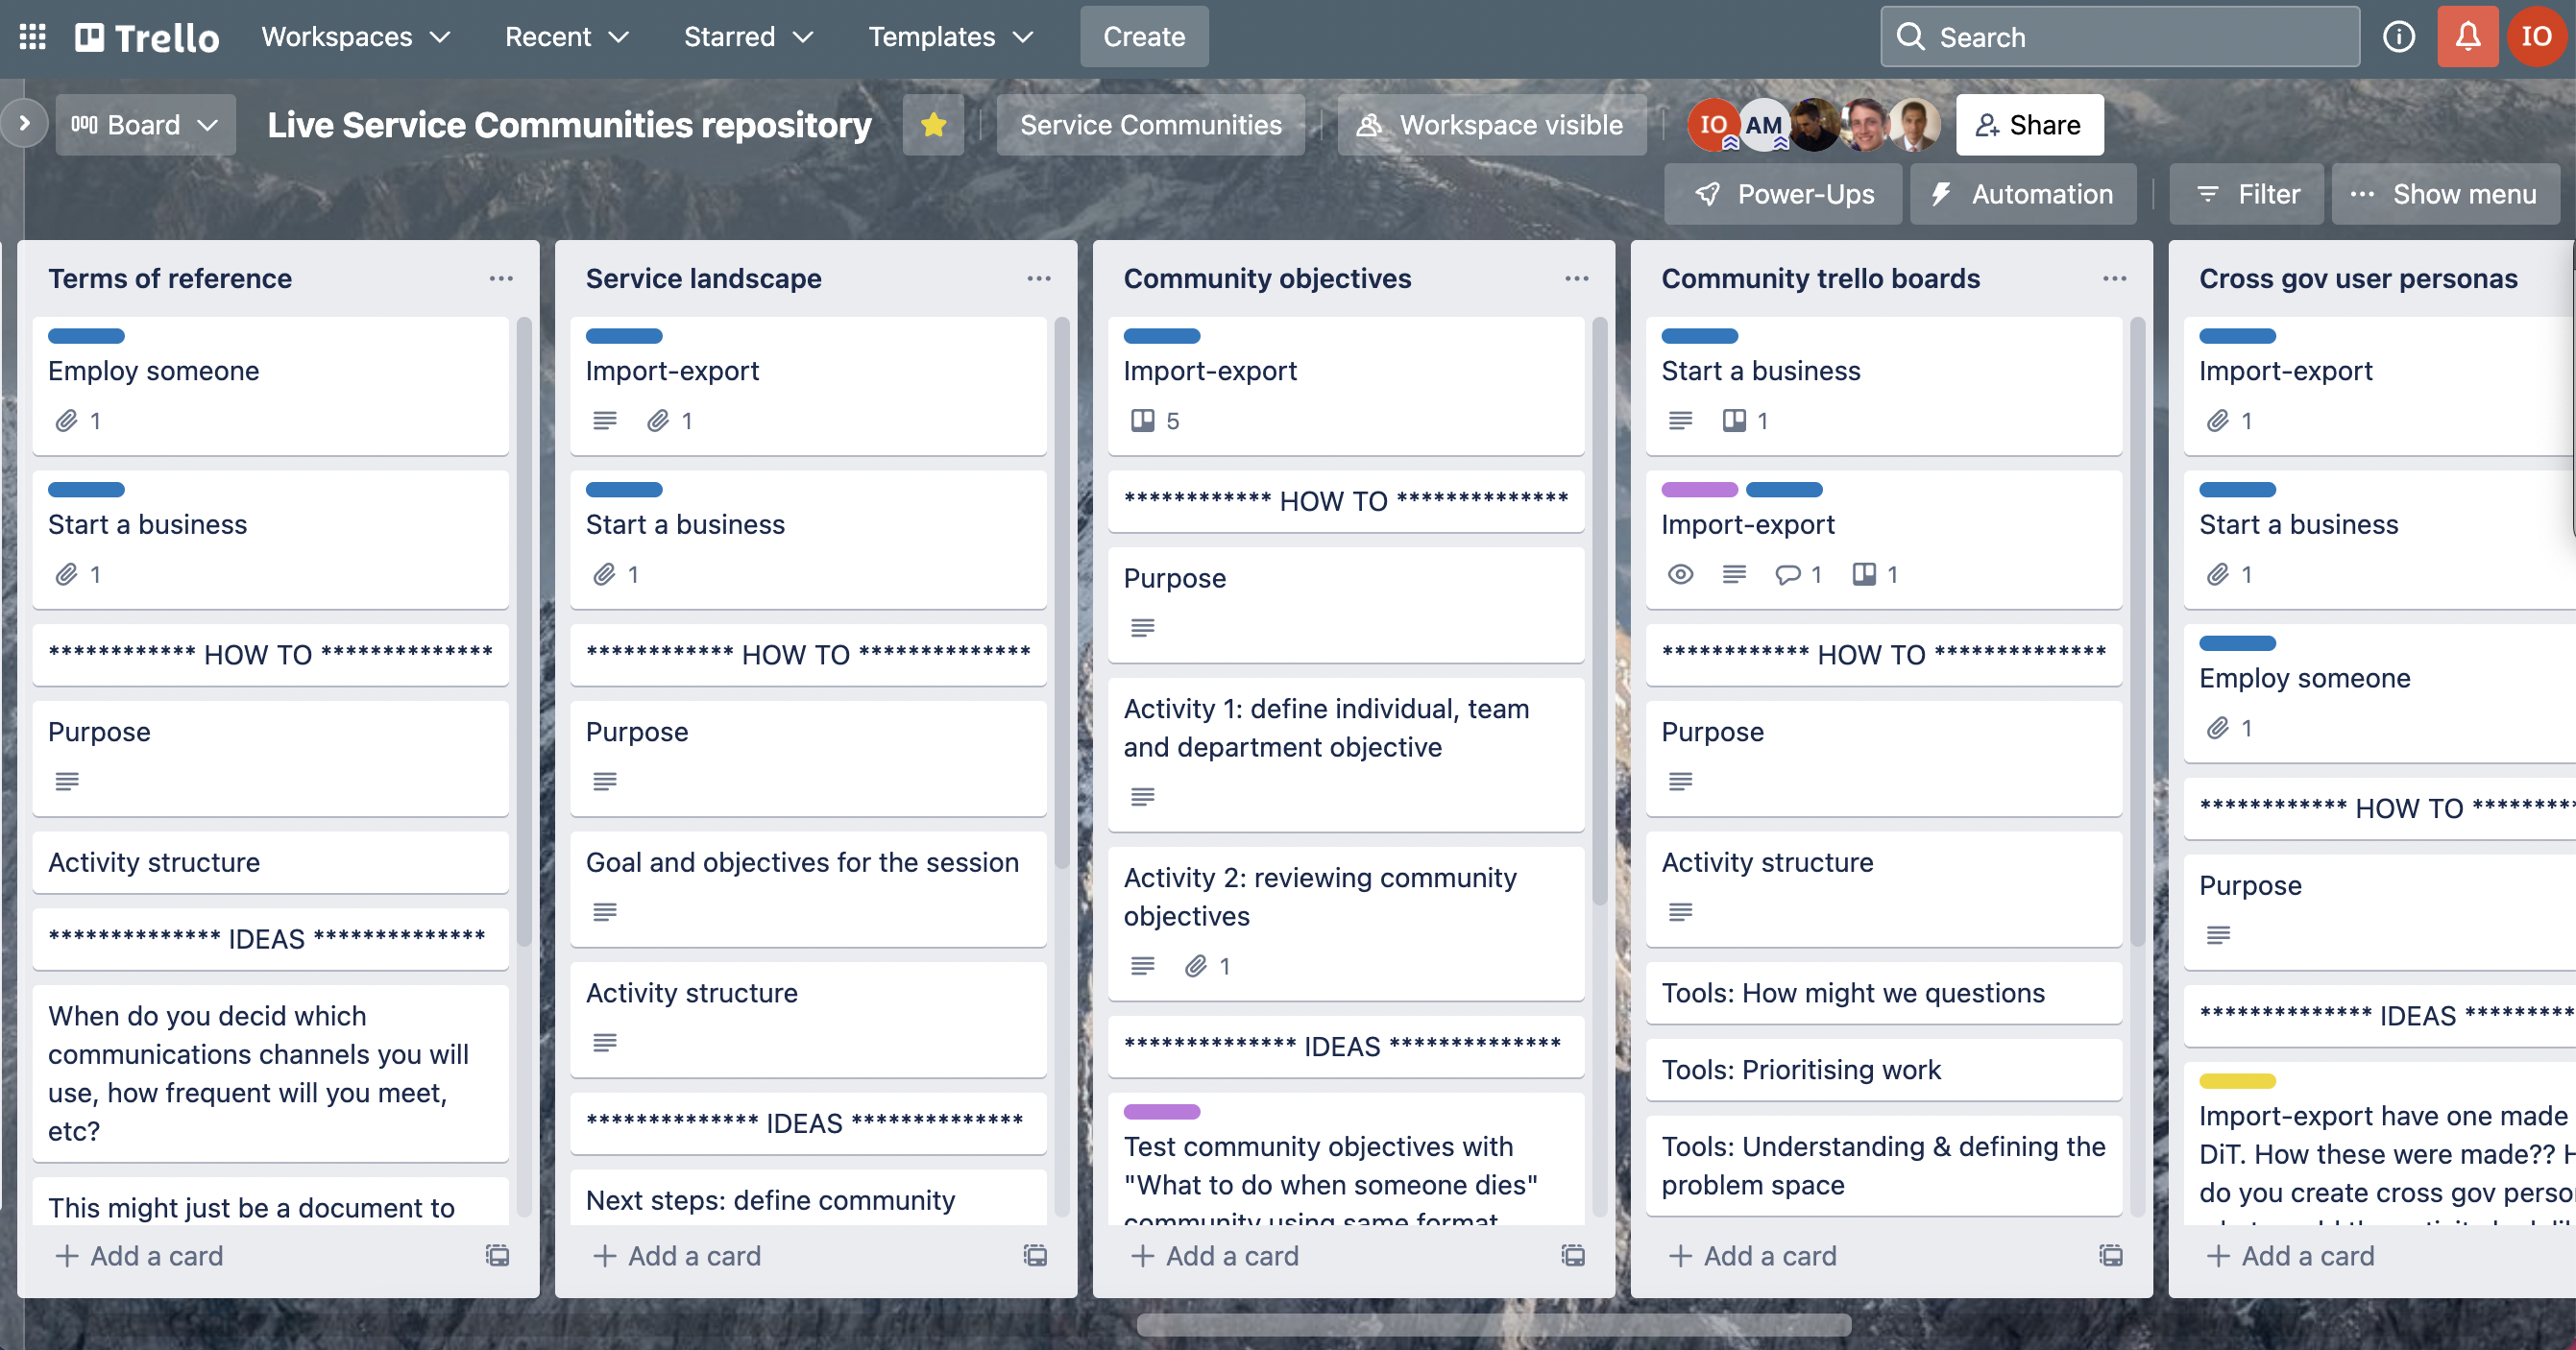 Screenshot of the service communities repository trello board. The title of the columns in the board are 'terms of reference', 'service landscape', 'community objectives', 'community trello boards', 'cross gov user personas'. Under each column there are examples of artefacts, activities, and ideas.